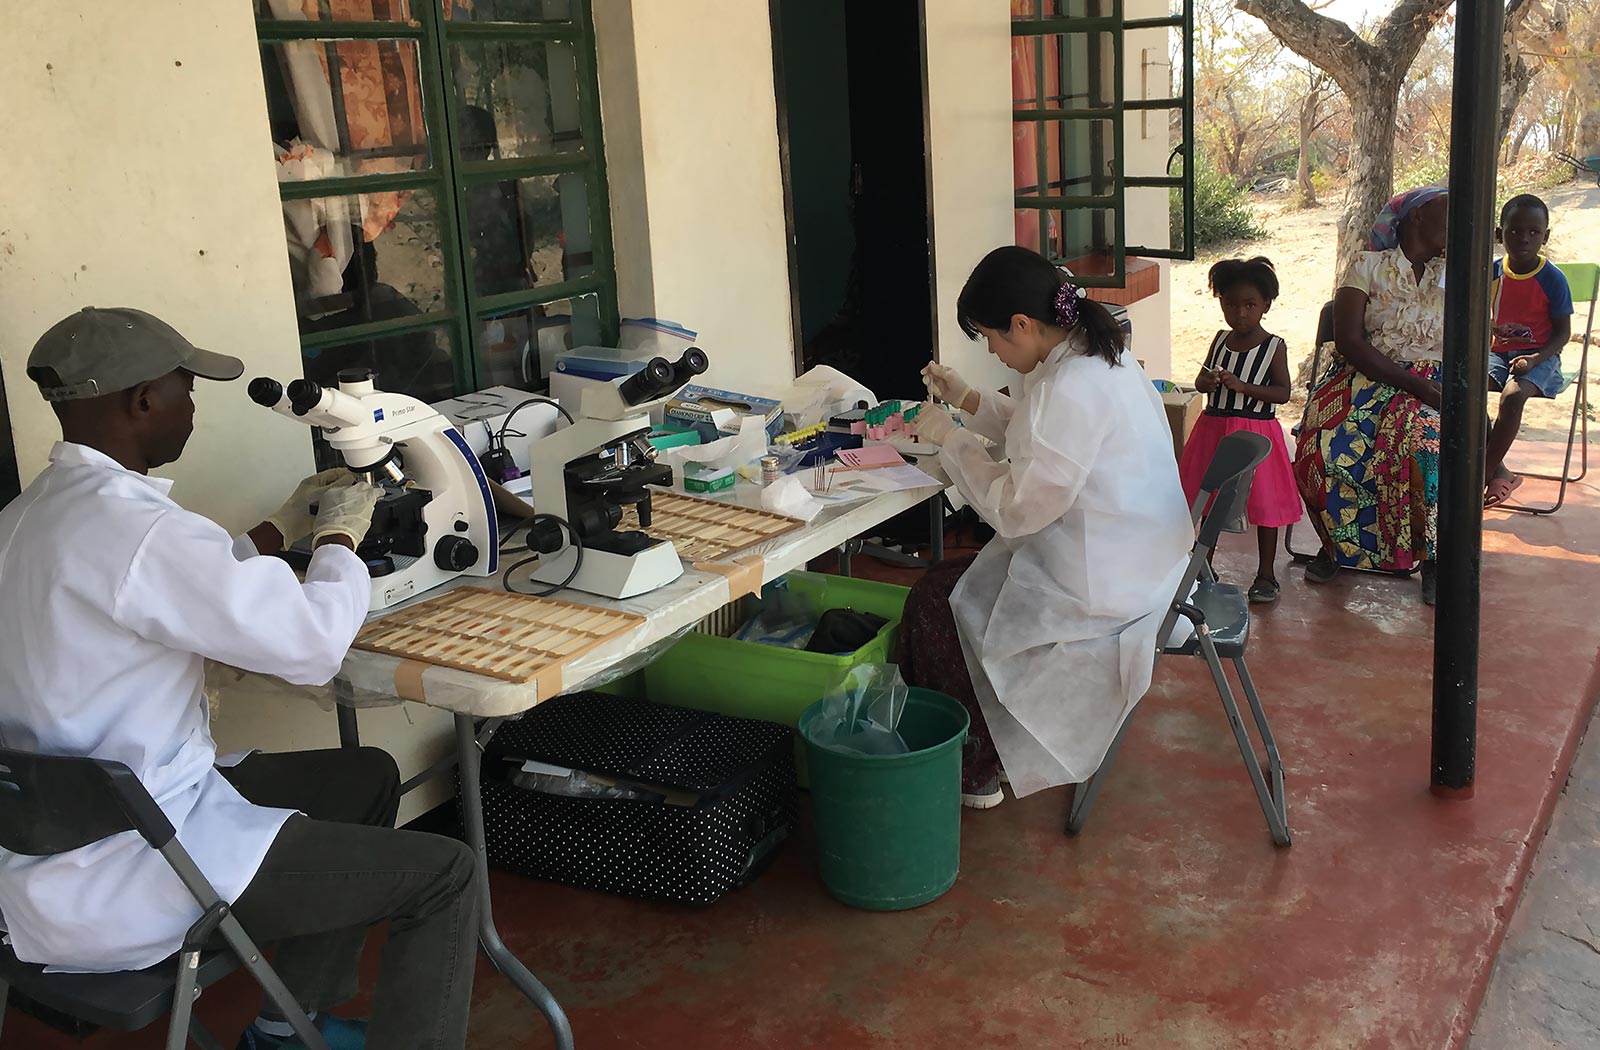 A photo of scientists performing microscopic observations for disease diagnosis in the outdoors. Photo taken in Zambia; provided by Kyoko Hayashida.